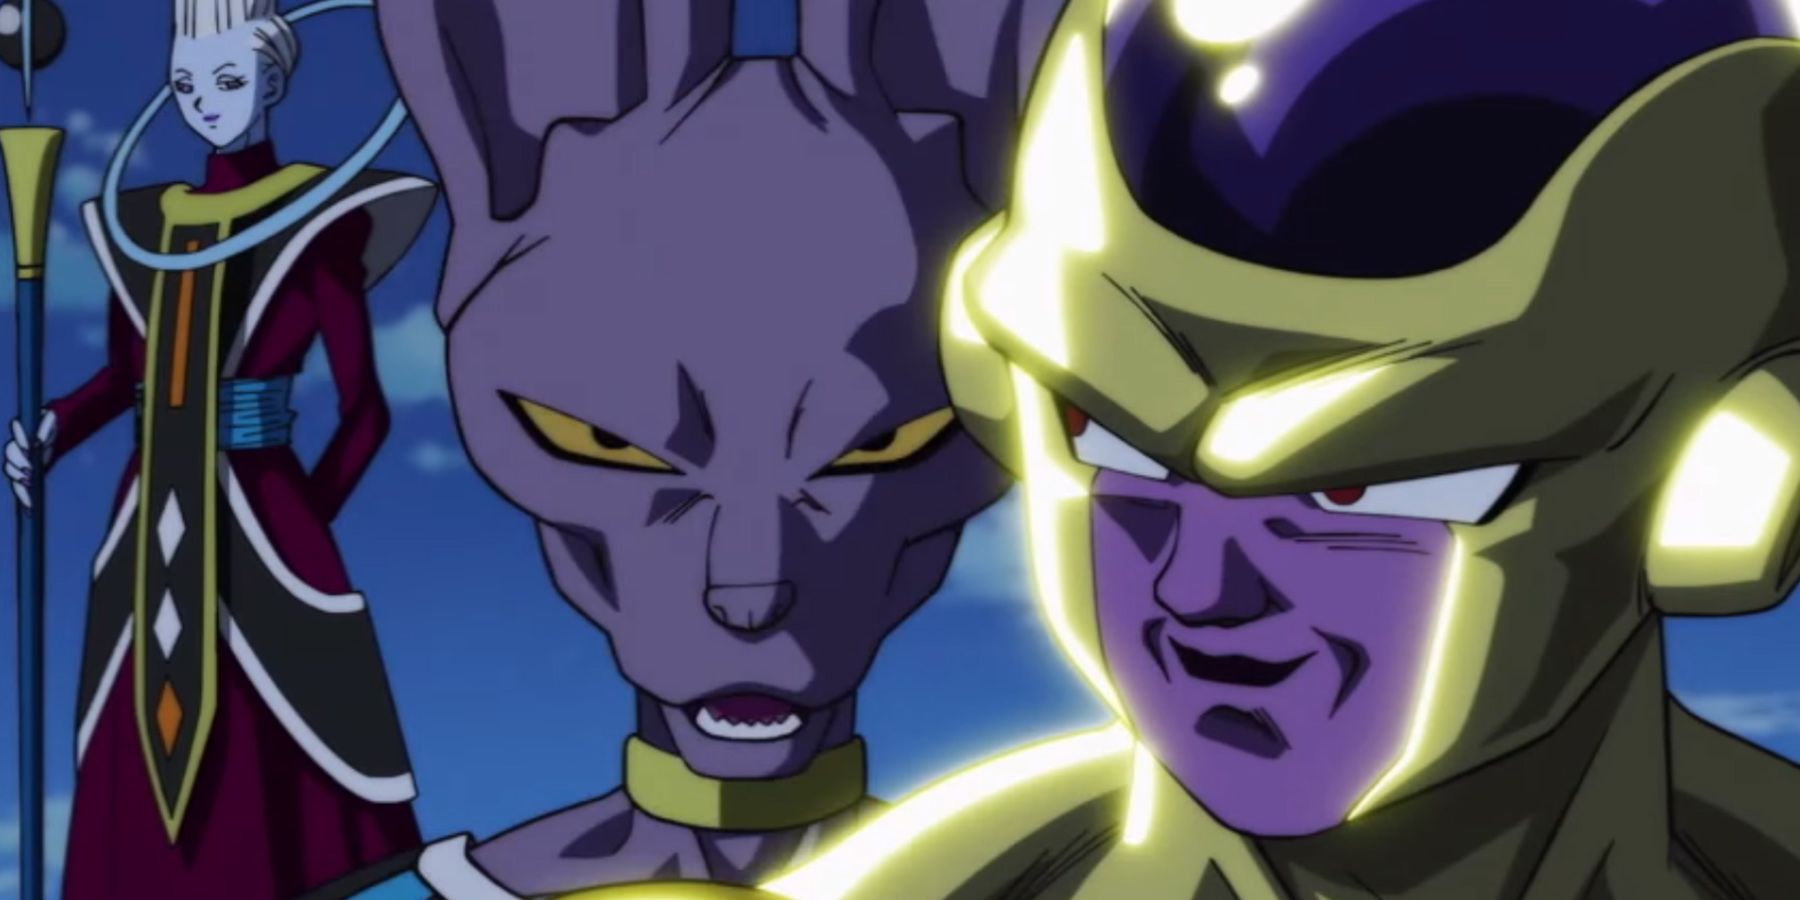 Frieza, Beerus, and Whis stand together in Dragon Ball.